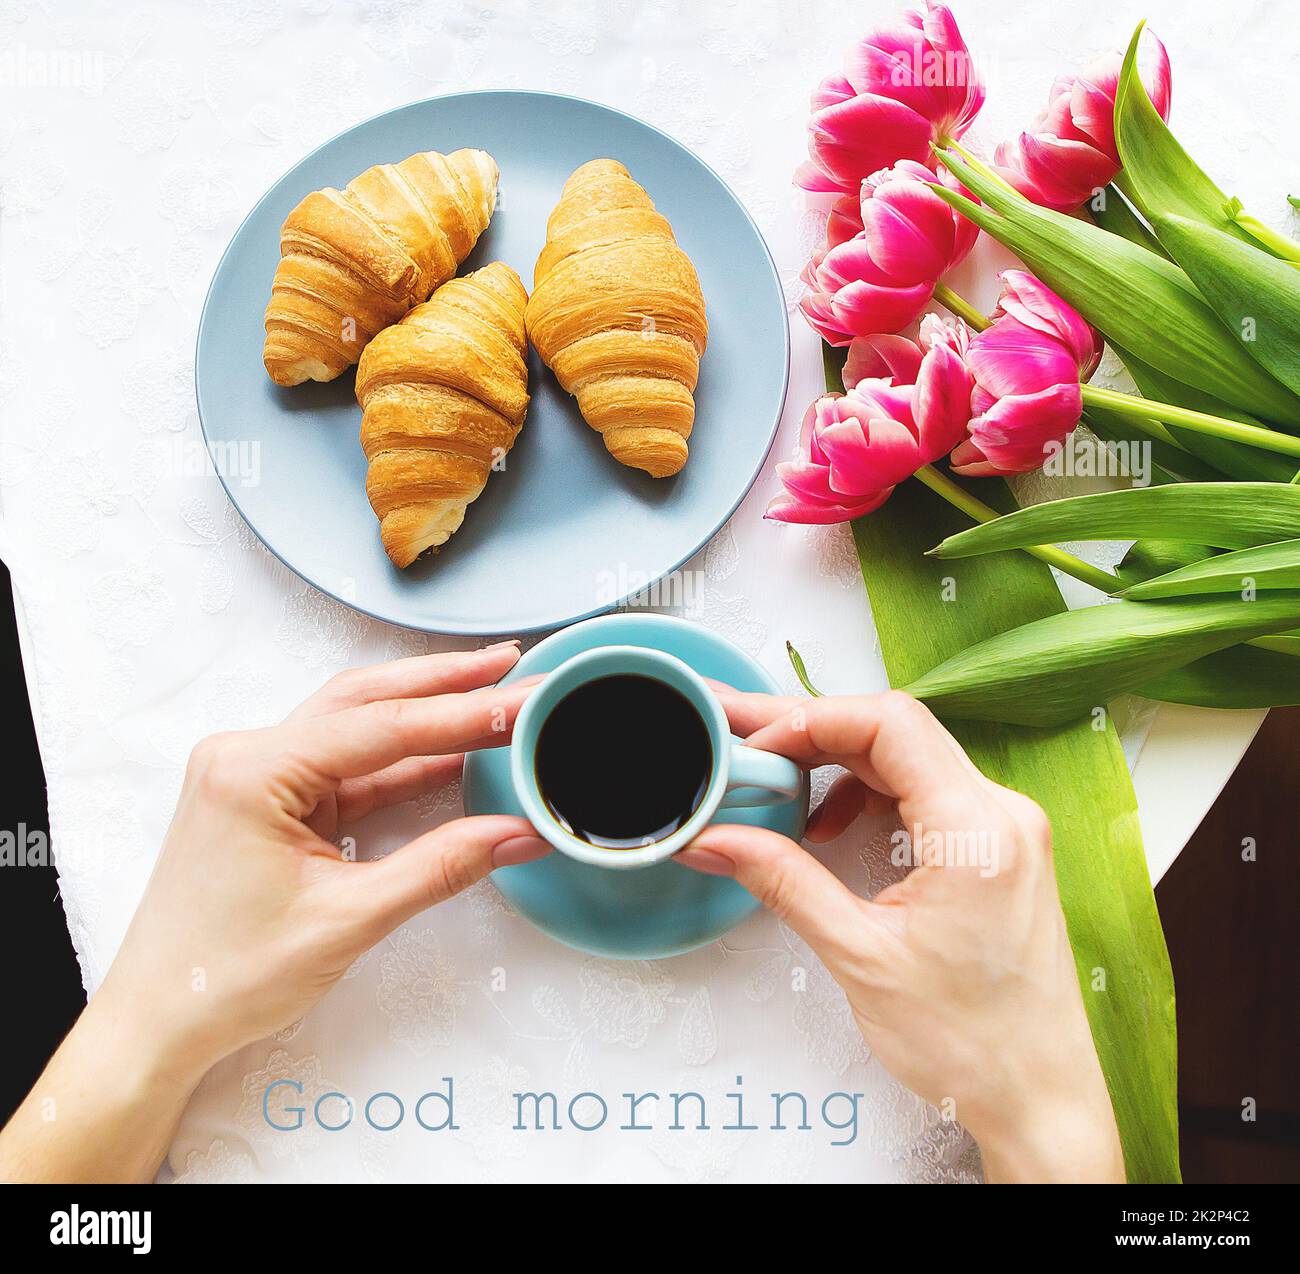 Girl with croissants and coffee, a bouquet of pink tulips, happy morning Stock Photo